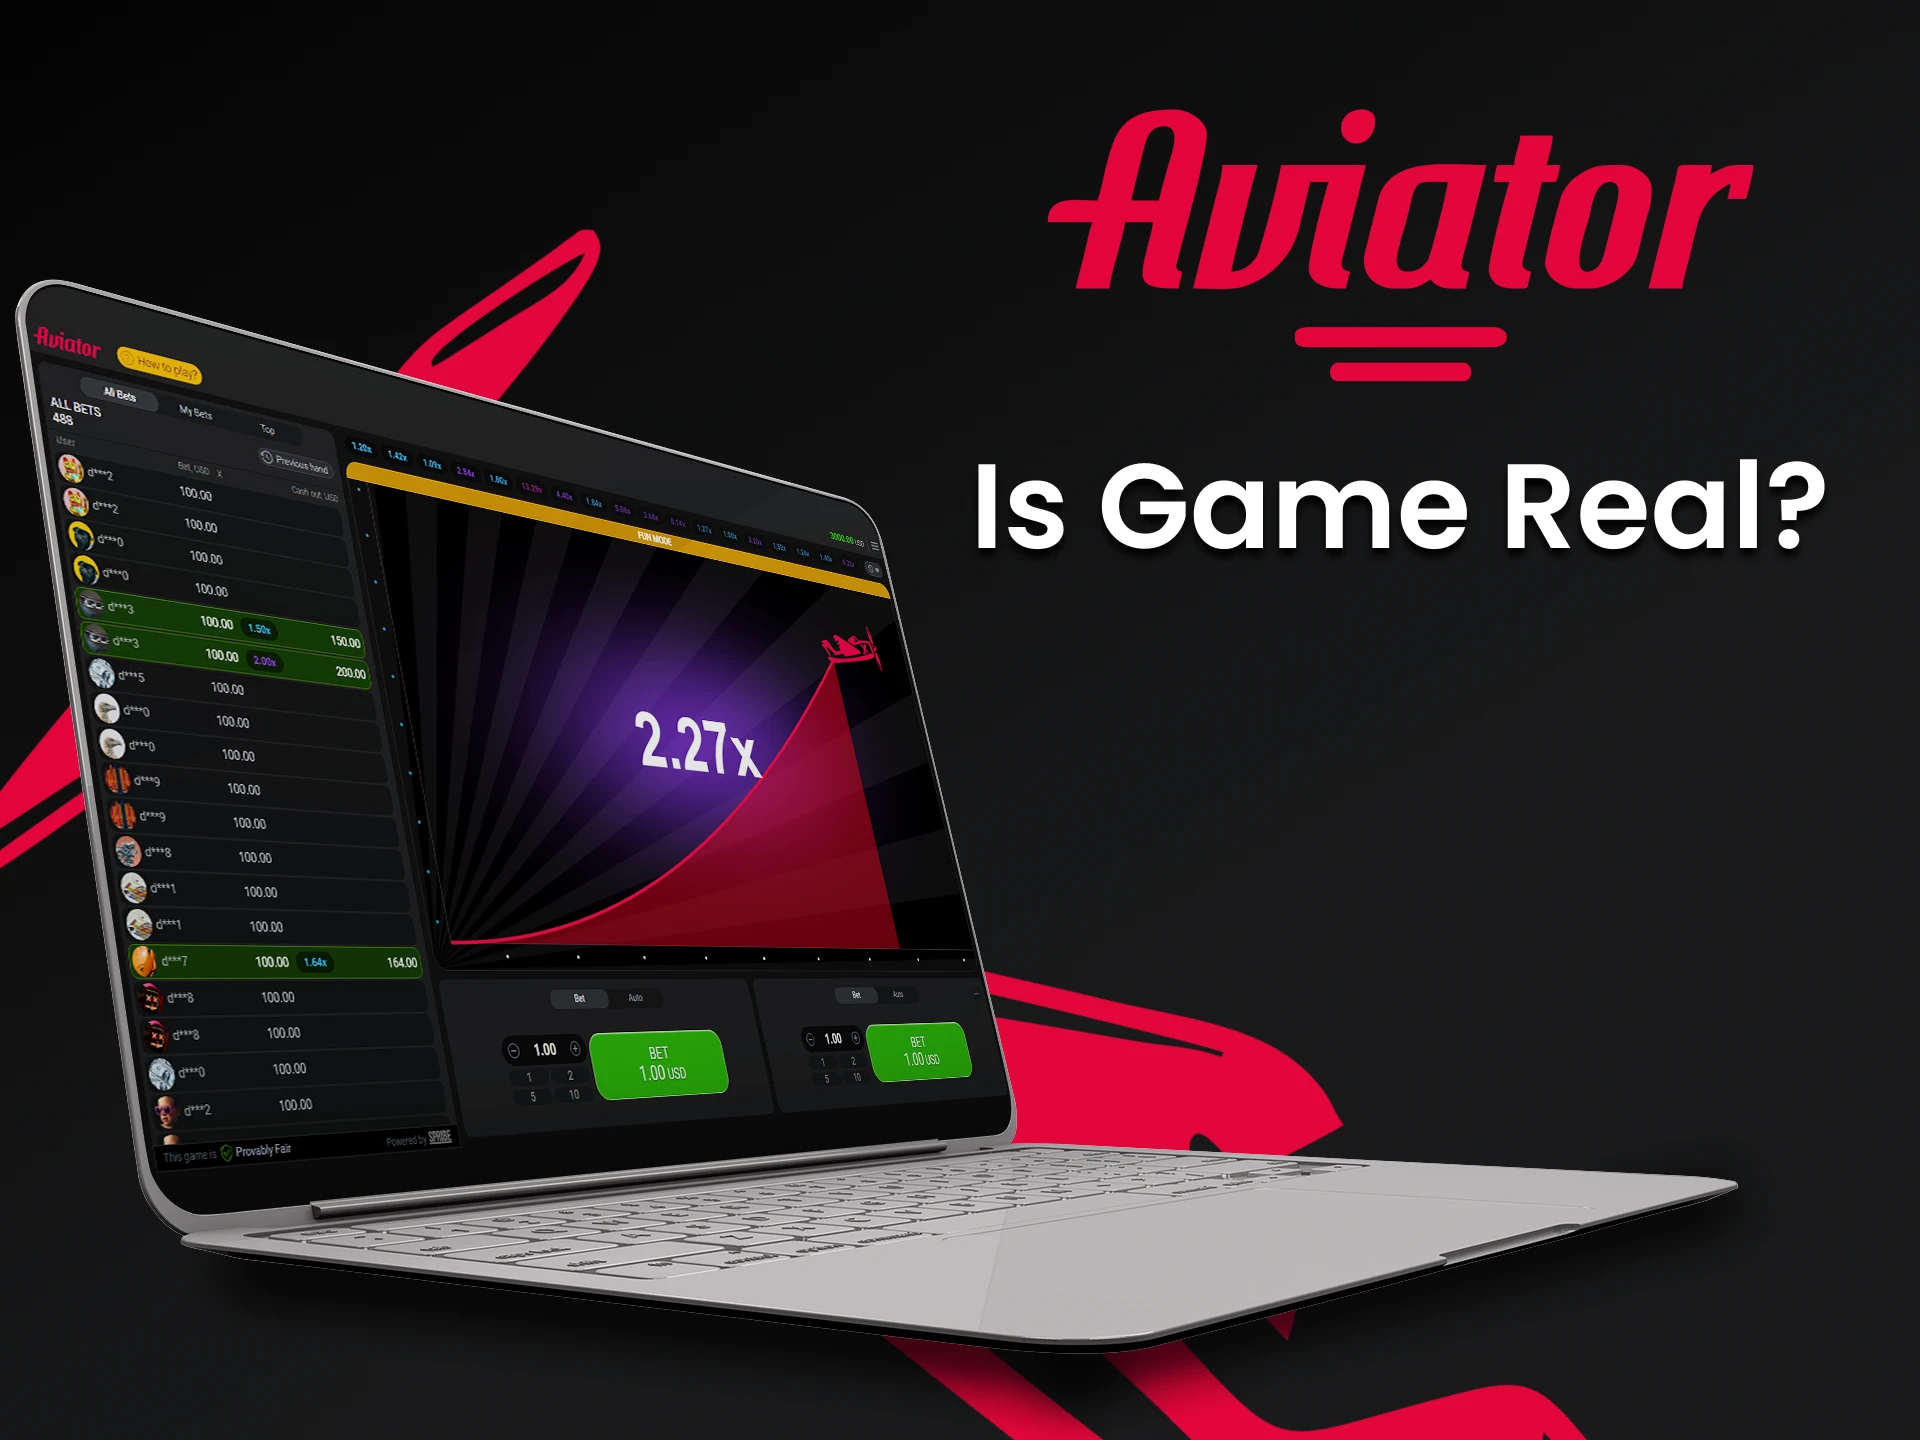 Aviator is a real game with a large number of players.